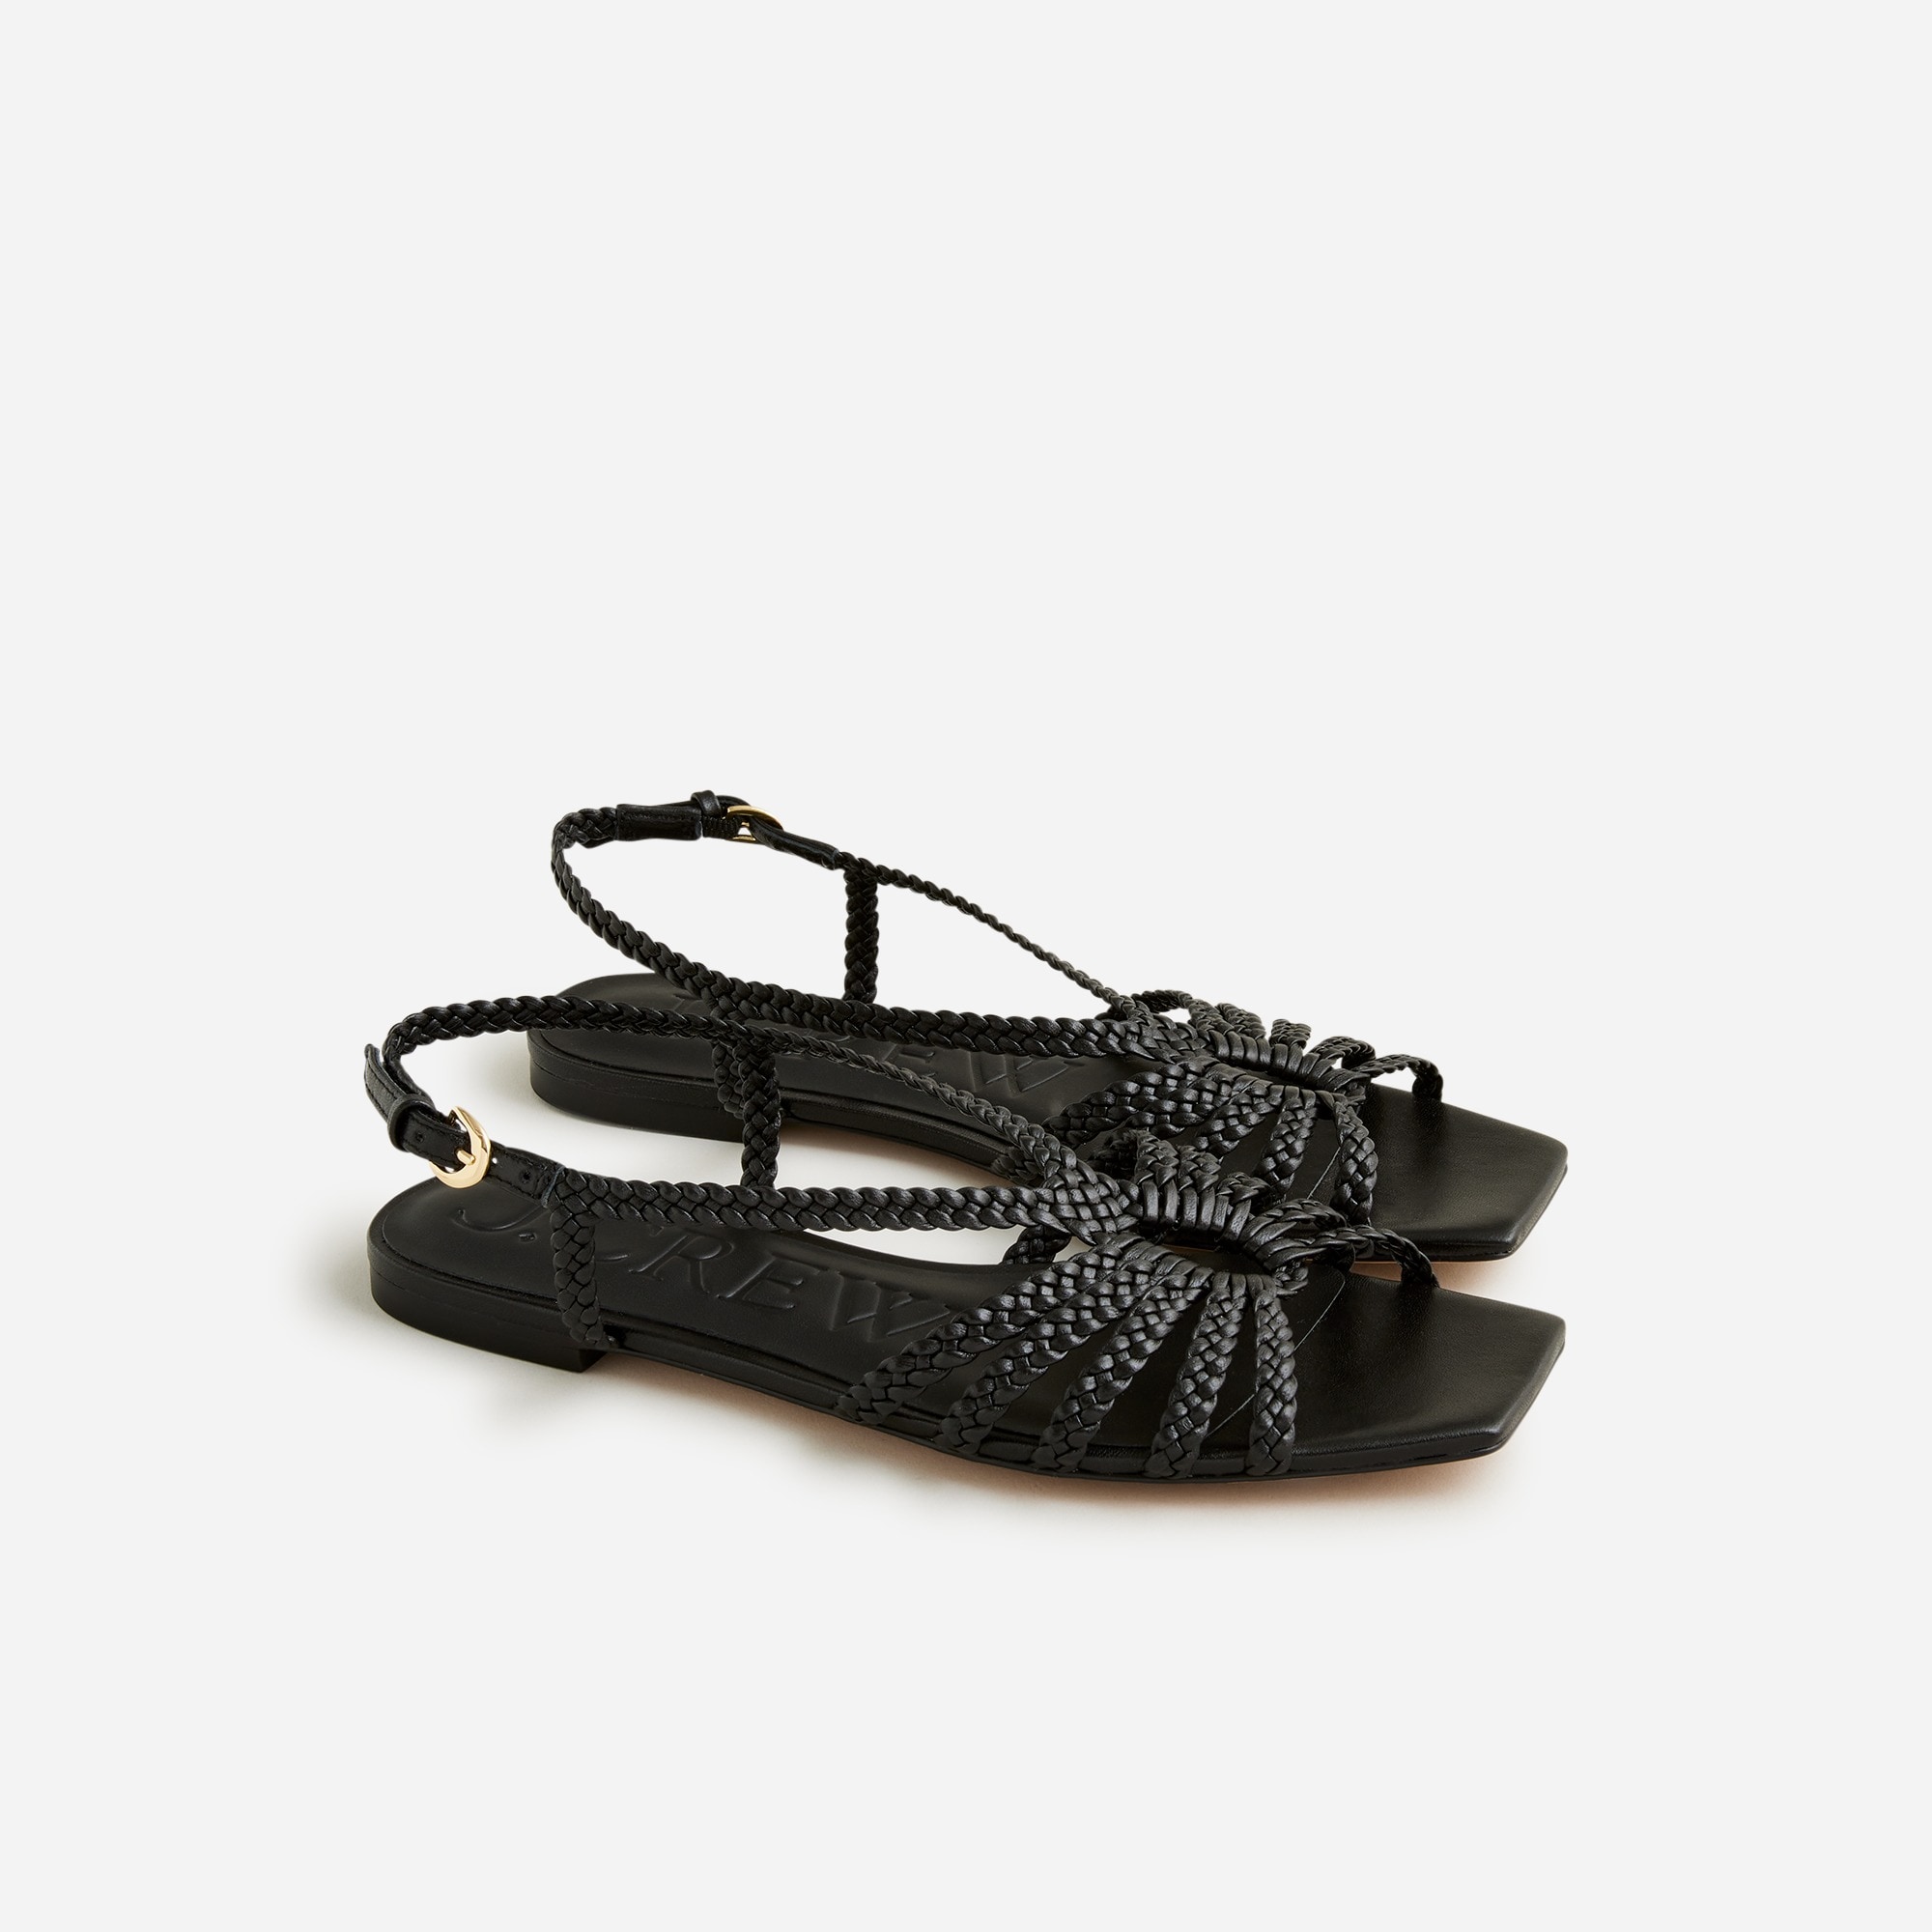  New Capri braided sandals in leather